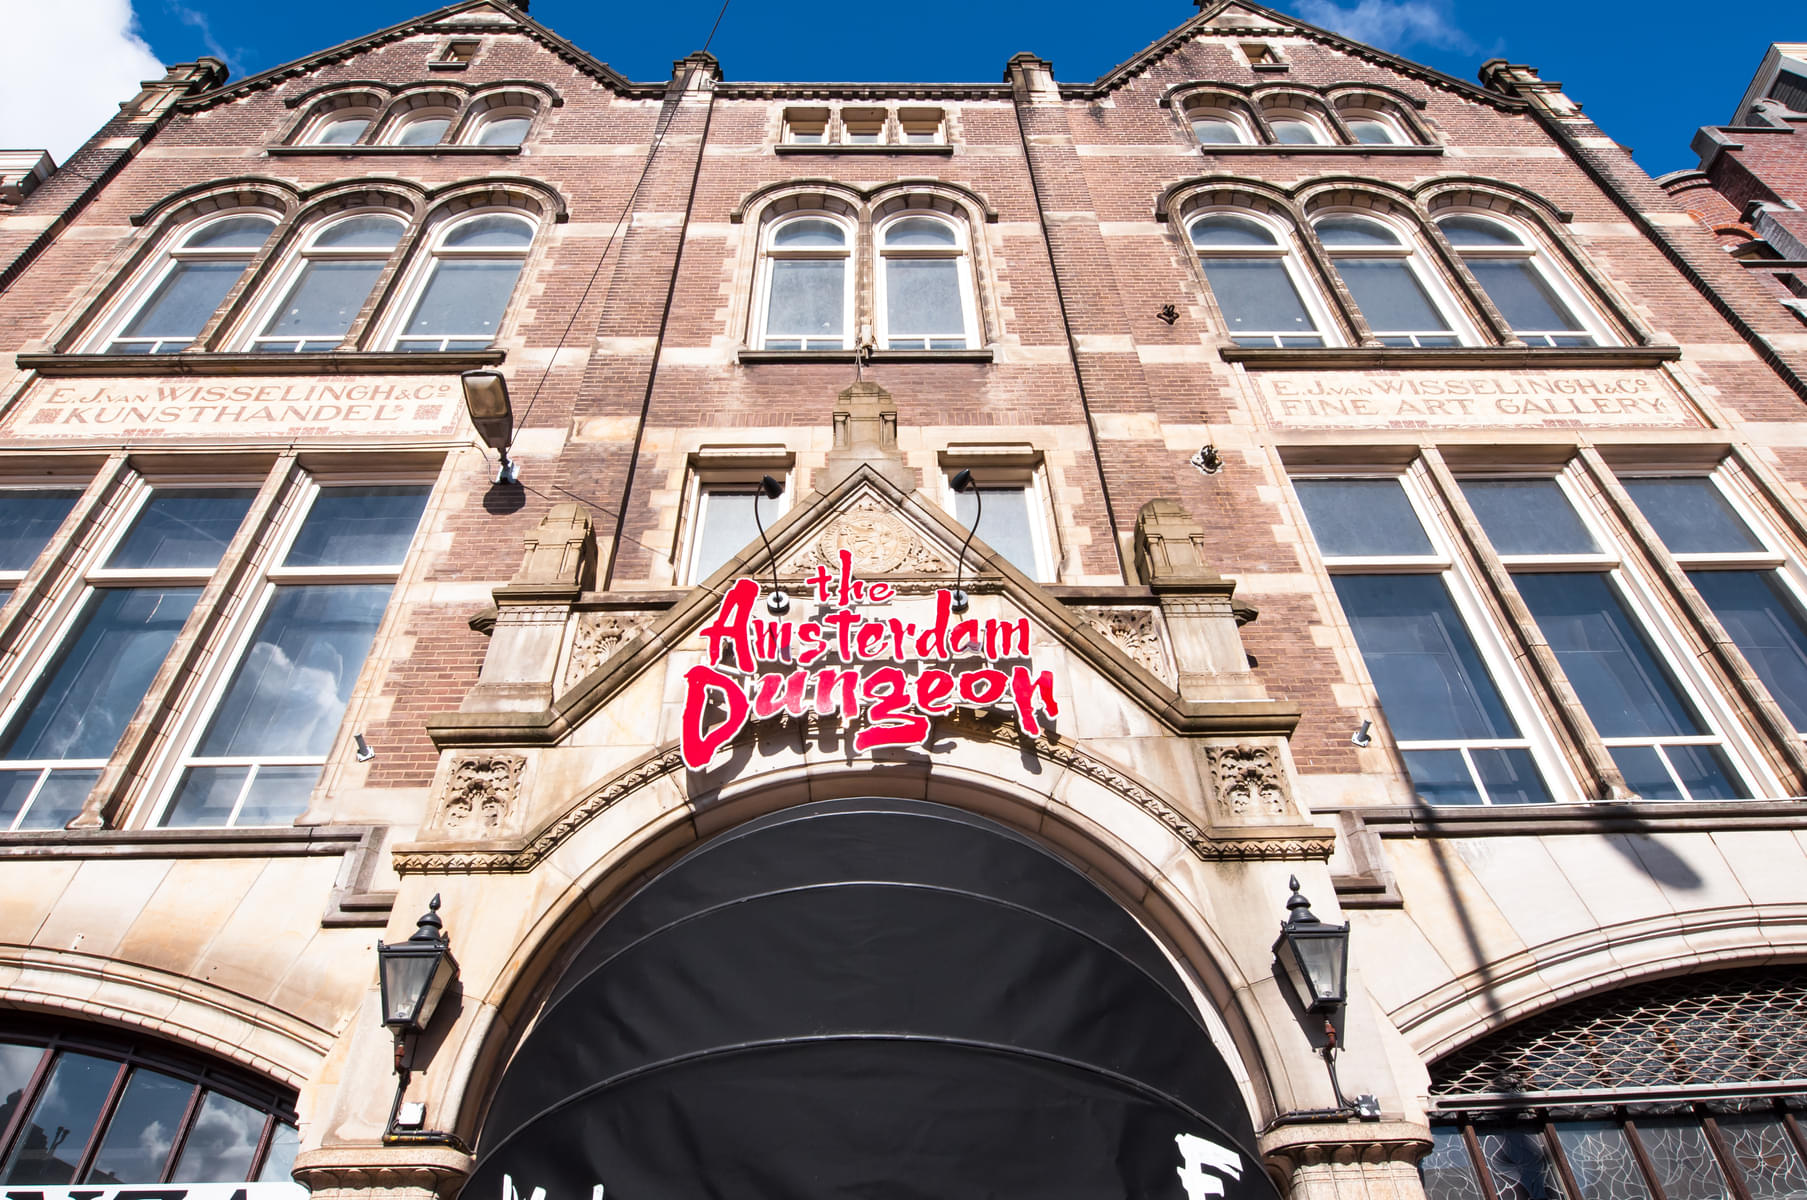 Experience 500 year old history of Amsterdam at The Amsterdam Dungeon